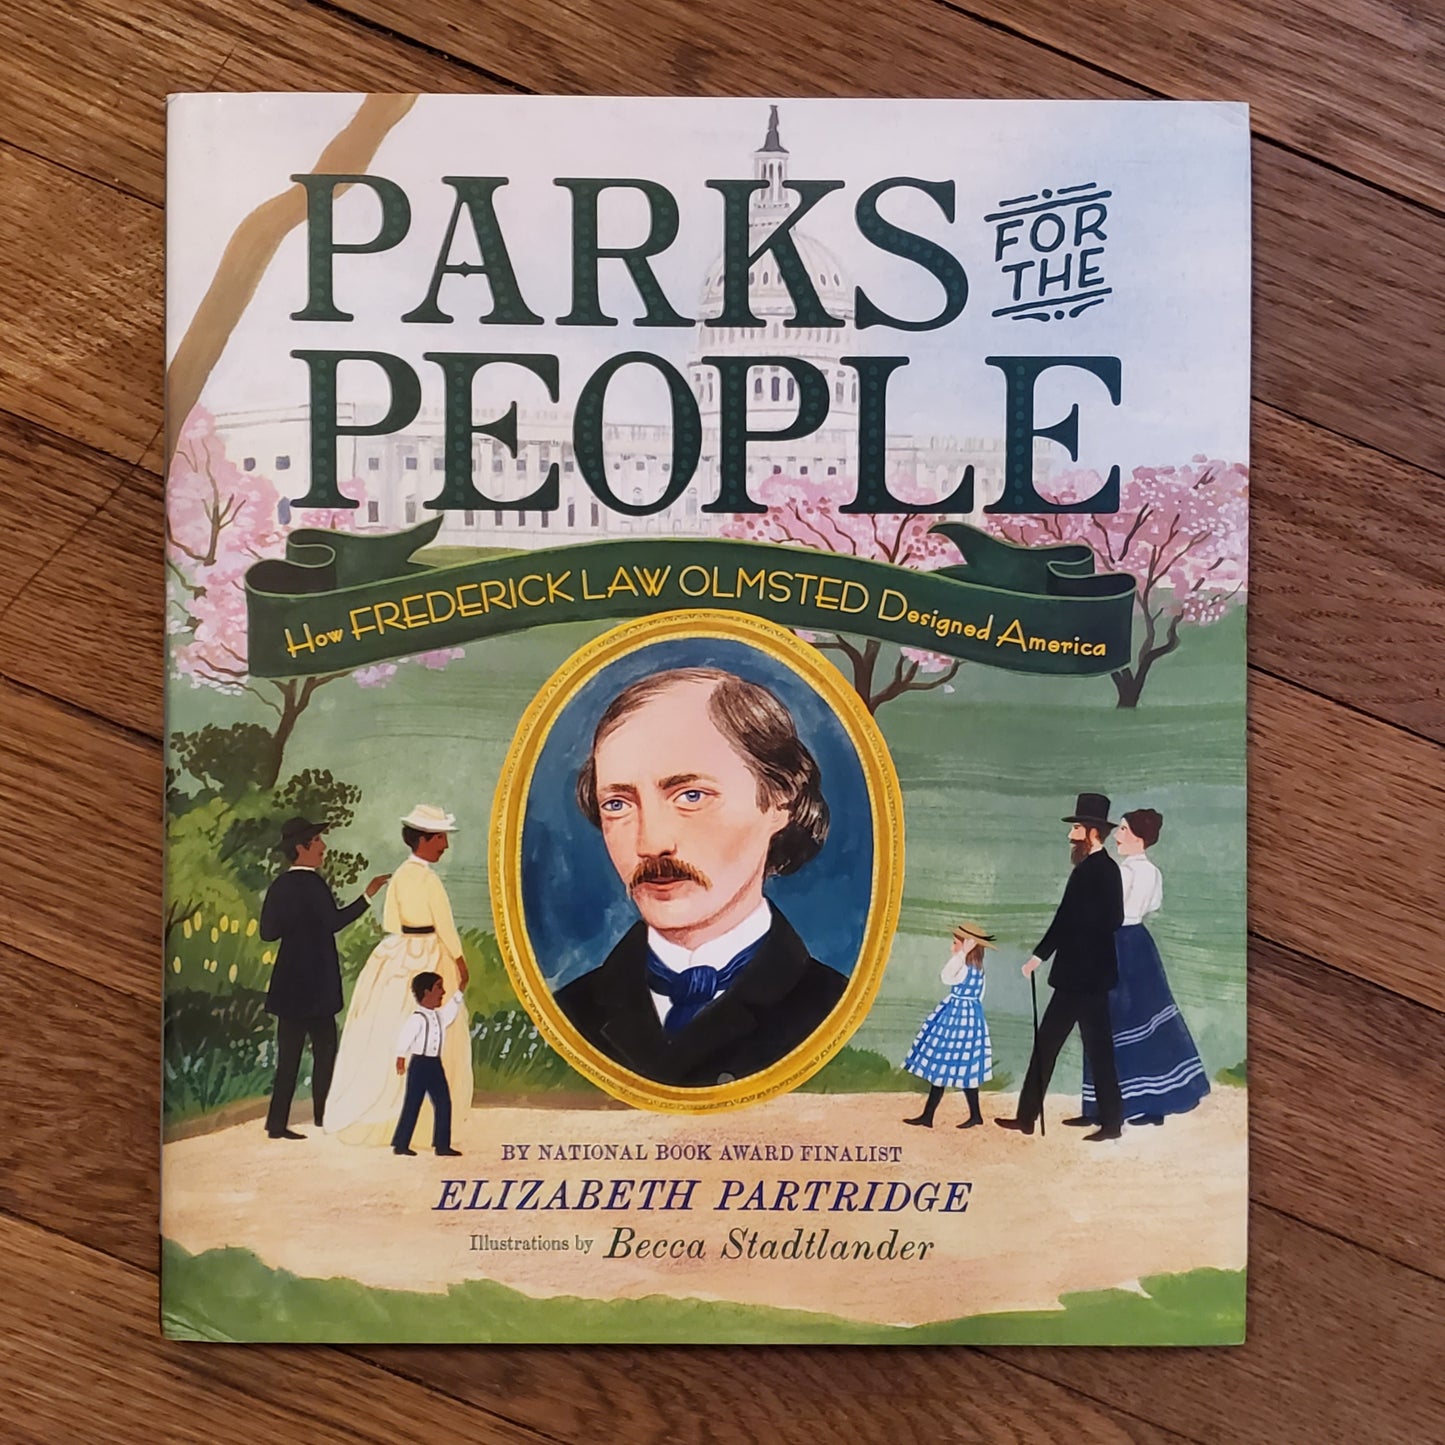 GB Parks for the People: How Frederick Law Olmsted Designed America